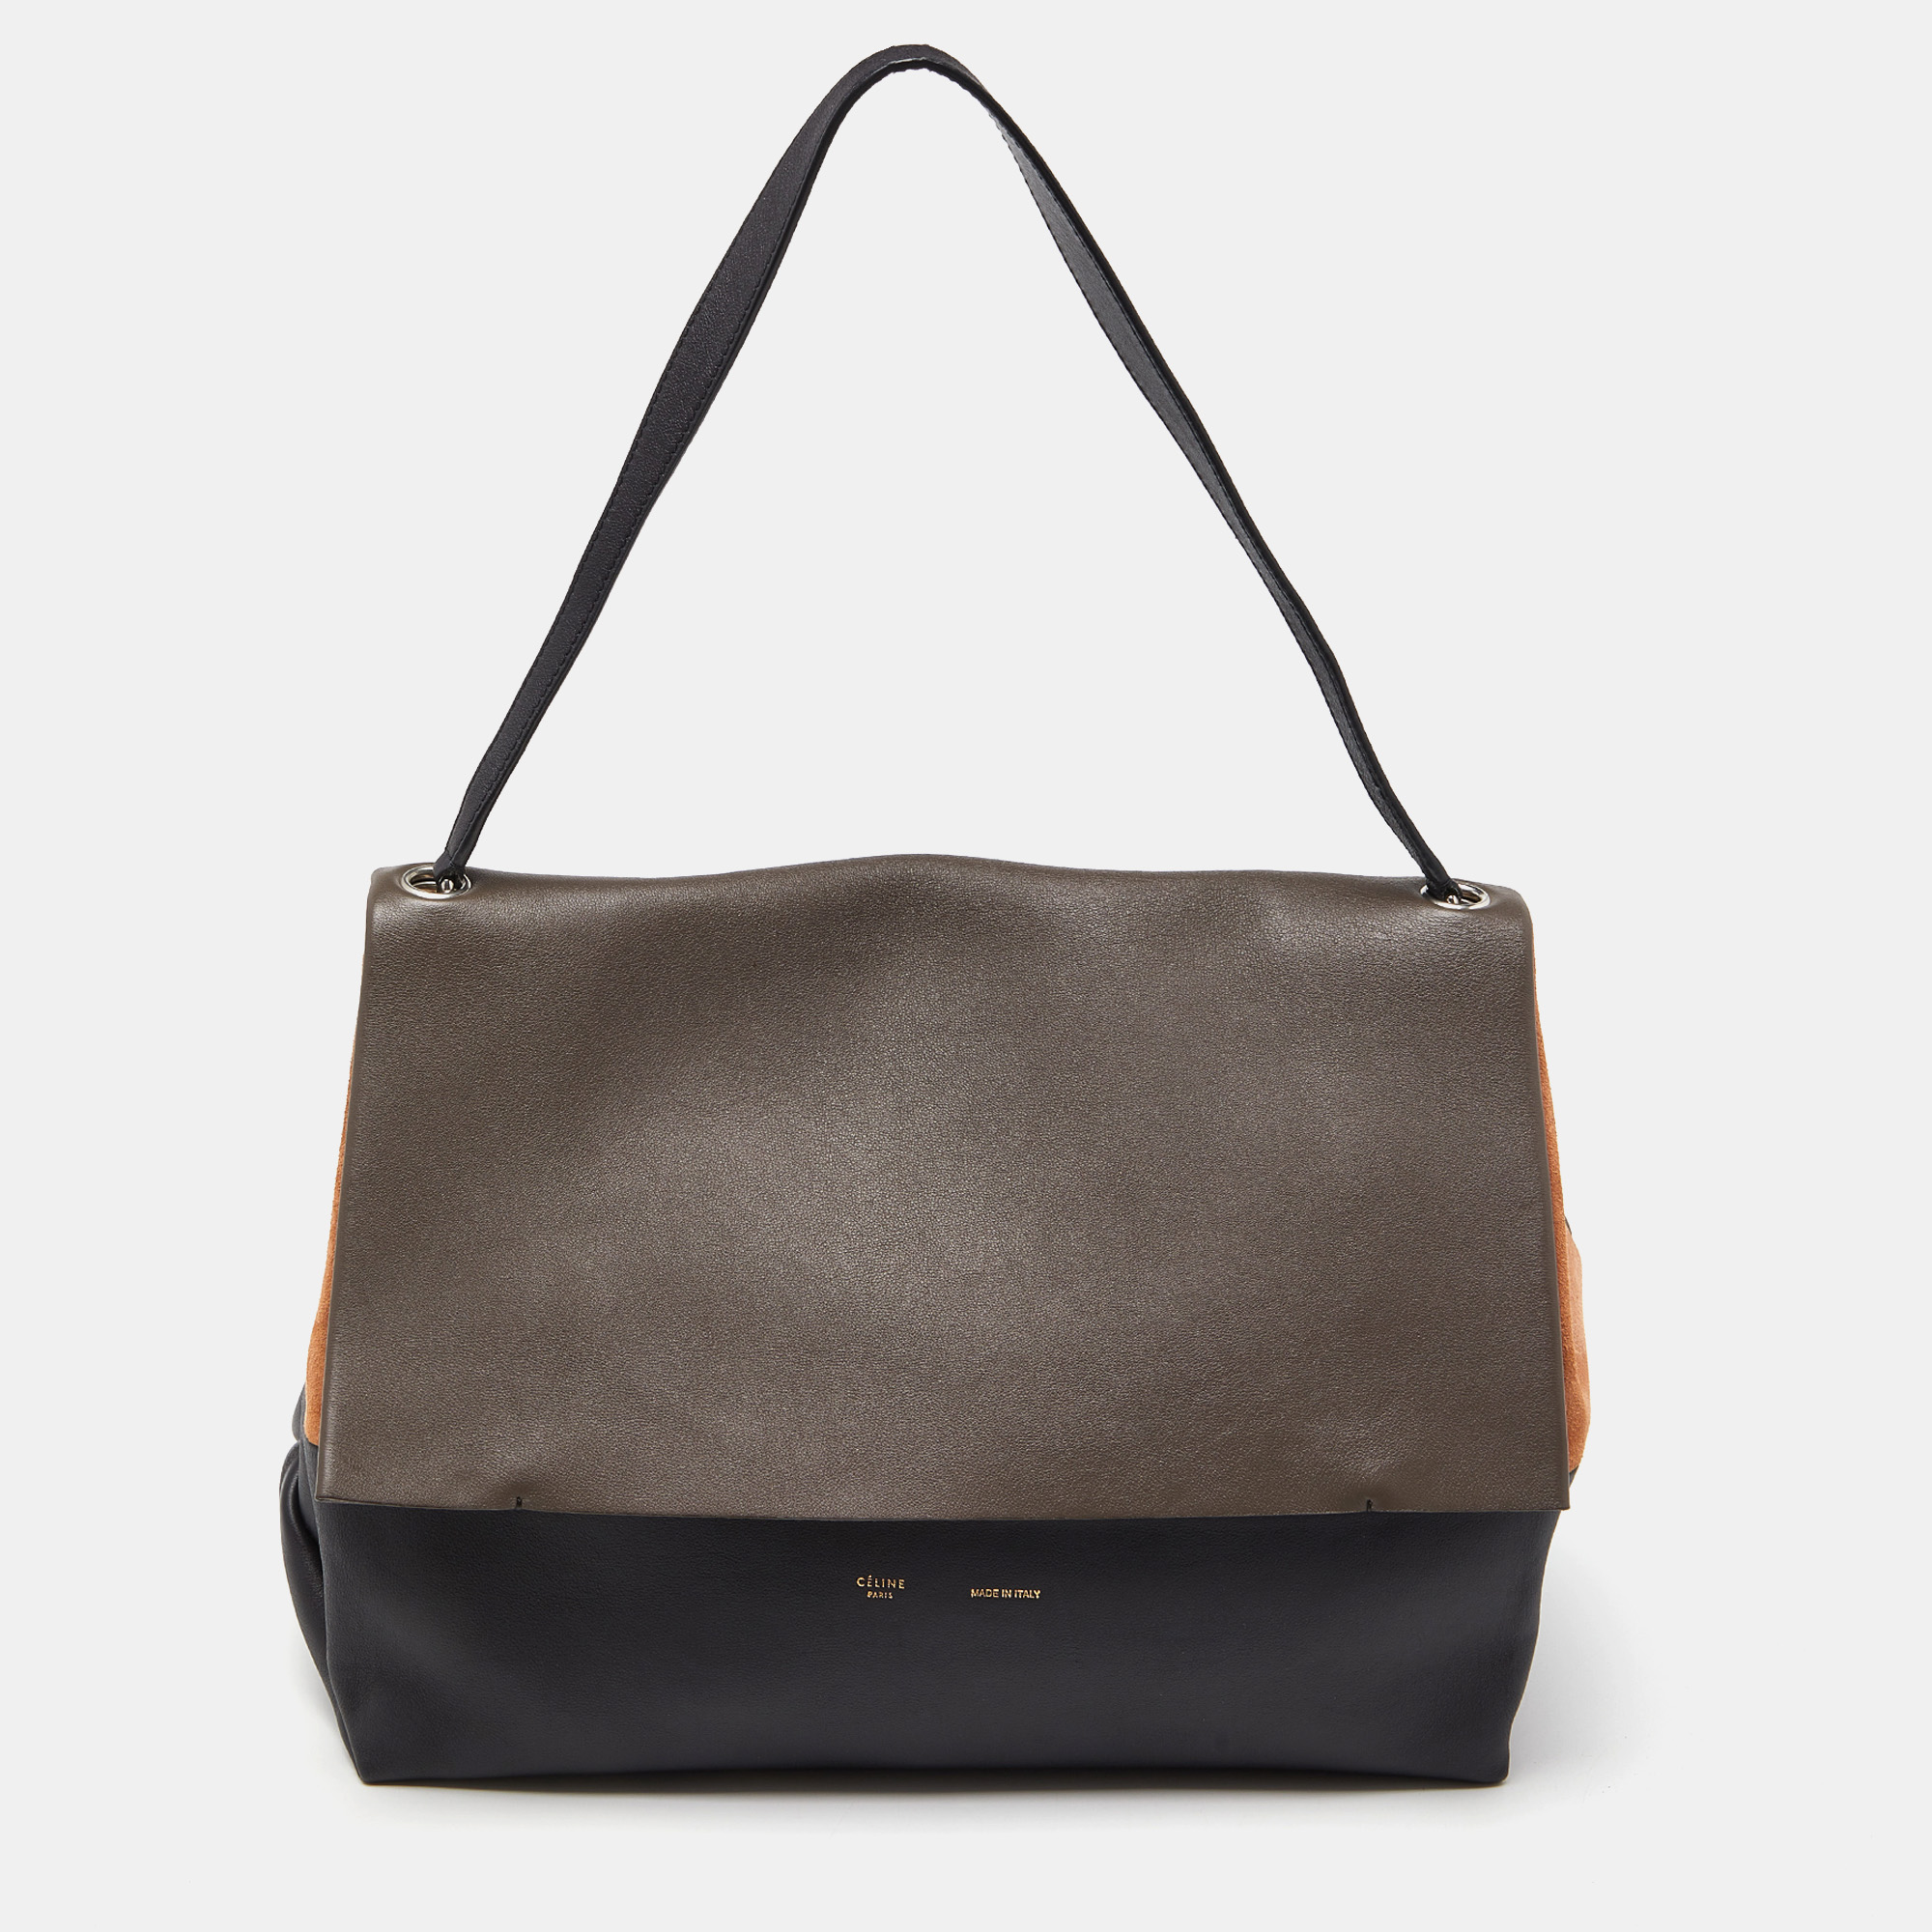 A classic handbag comes with the promise of enduring appeal boosting your style time and again. This designer bag is one such creation. It's a fine purchase.